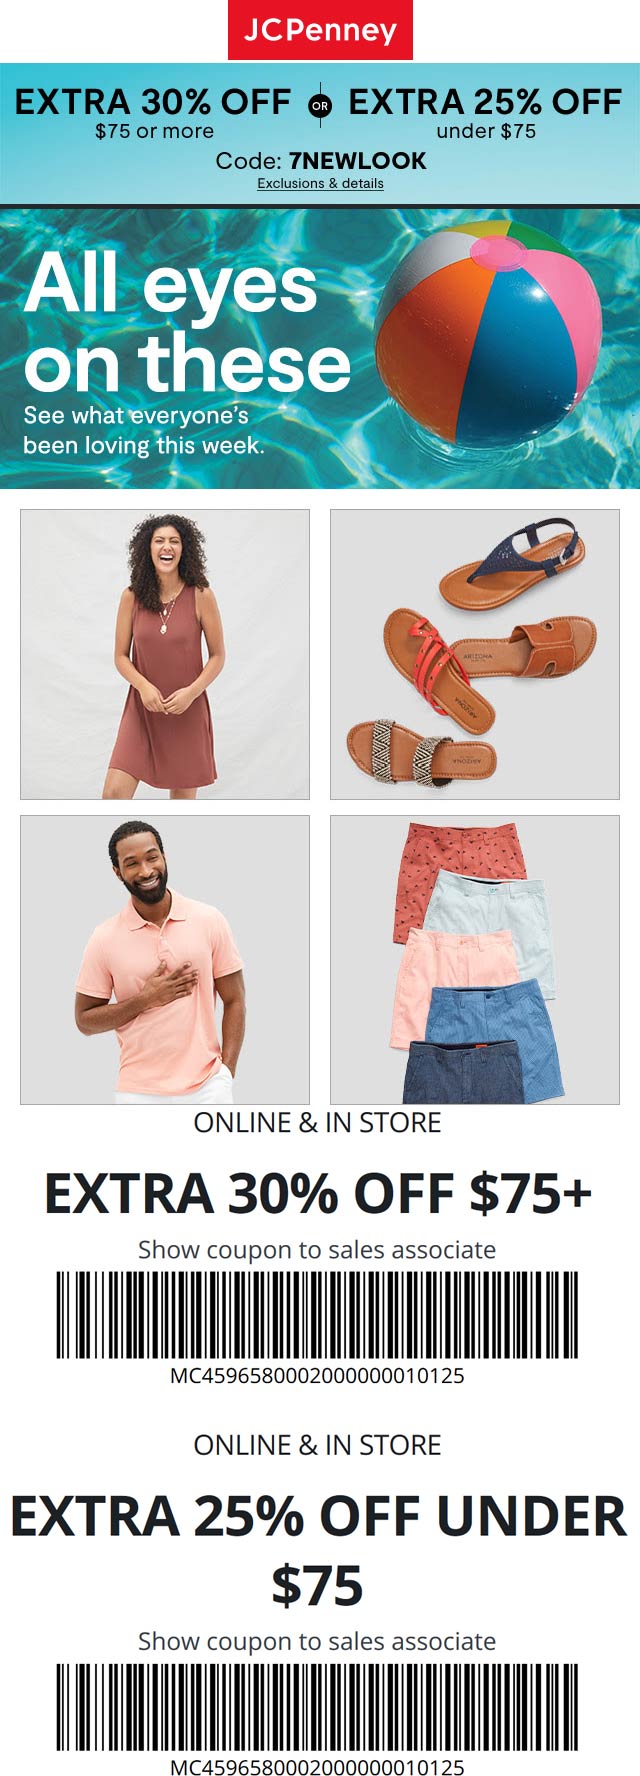 extra-25-30-off-at-jcpenney-or-online-via-promo-code-hooray9-jcpenney-the-coupons-app